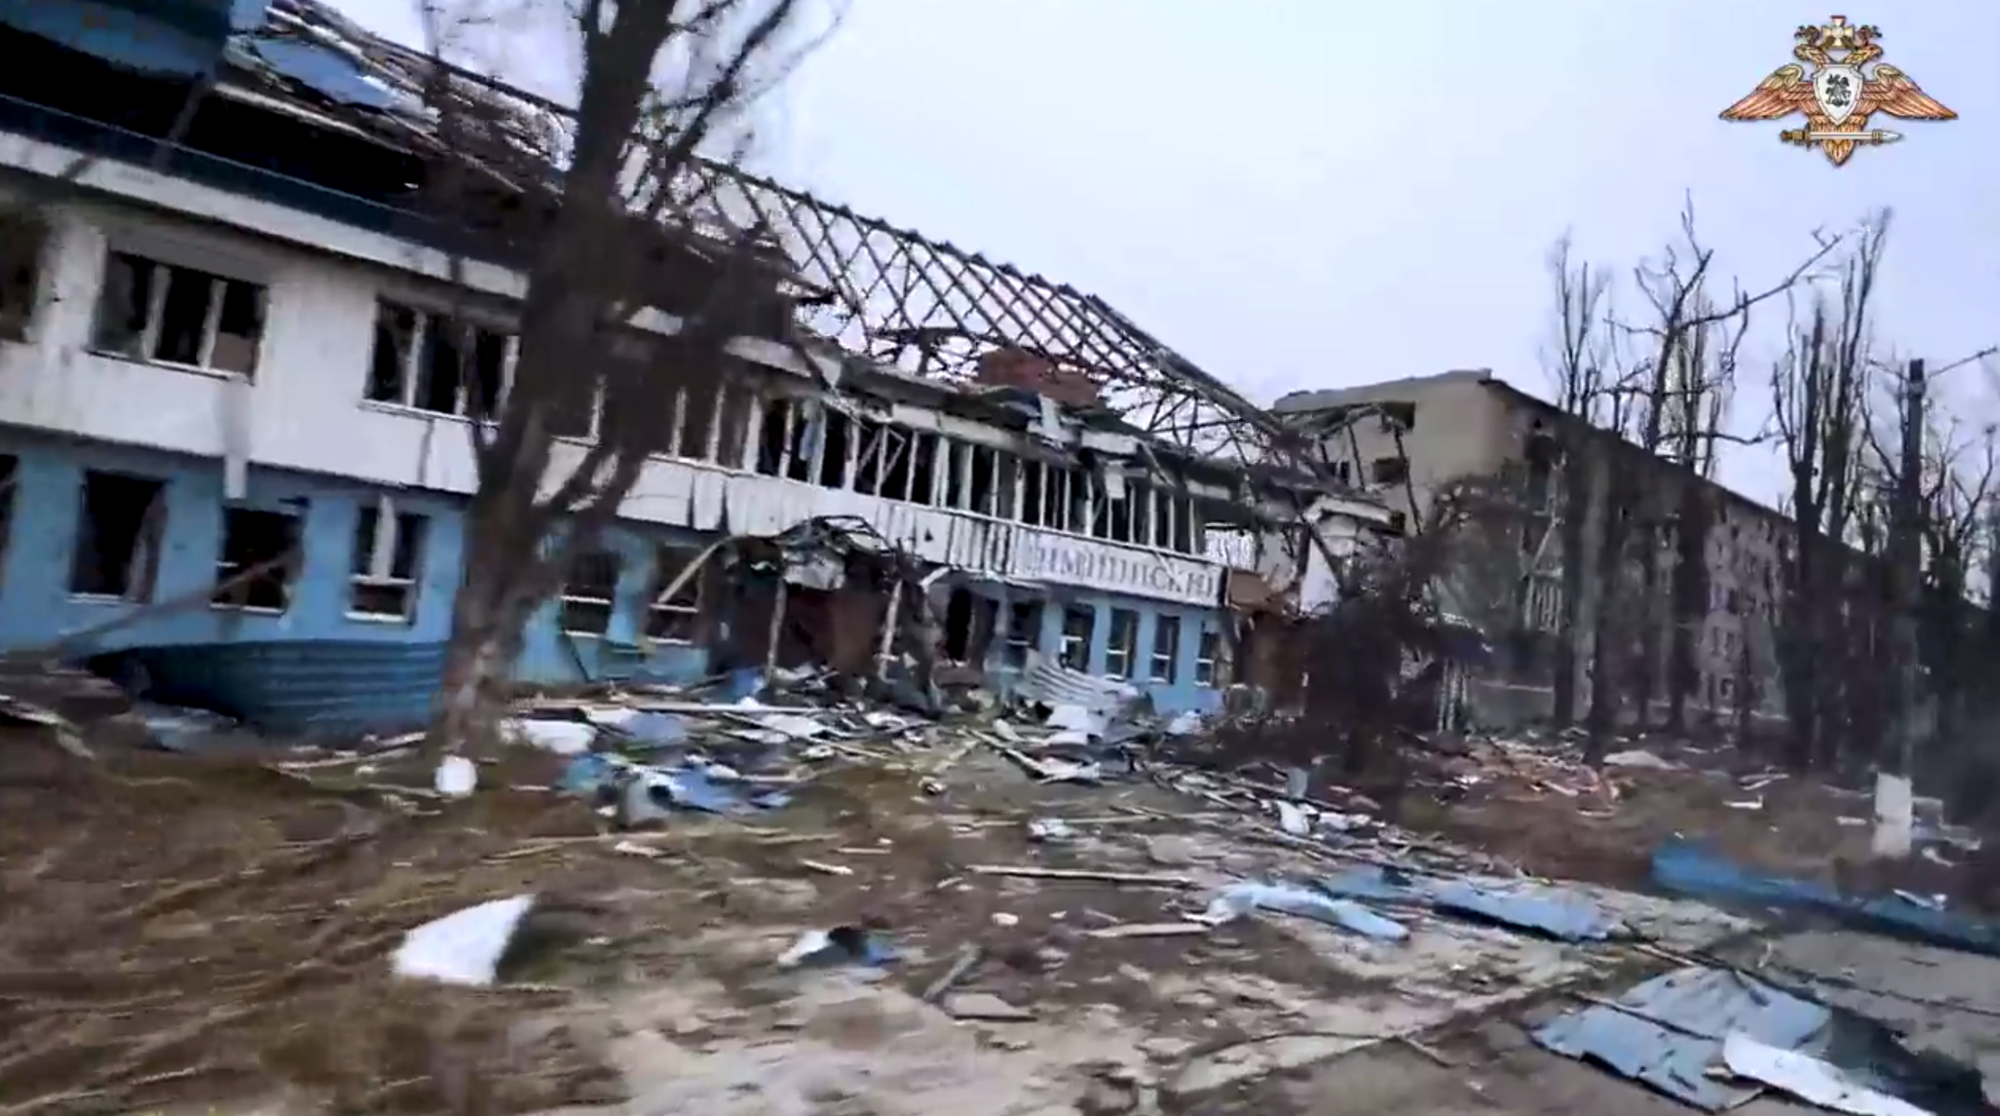 Russian occupiers boasted of capturing Avdiivka, showing the city destroyed by them